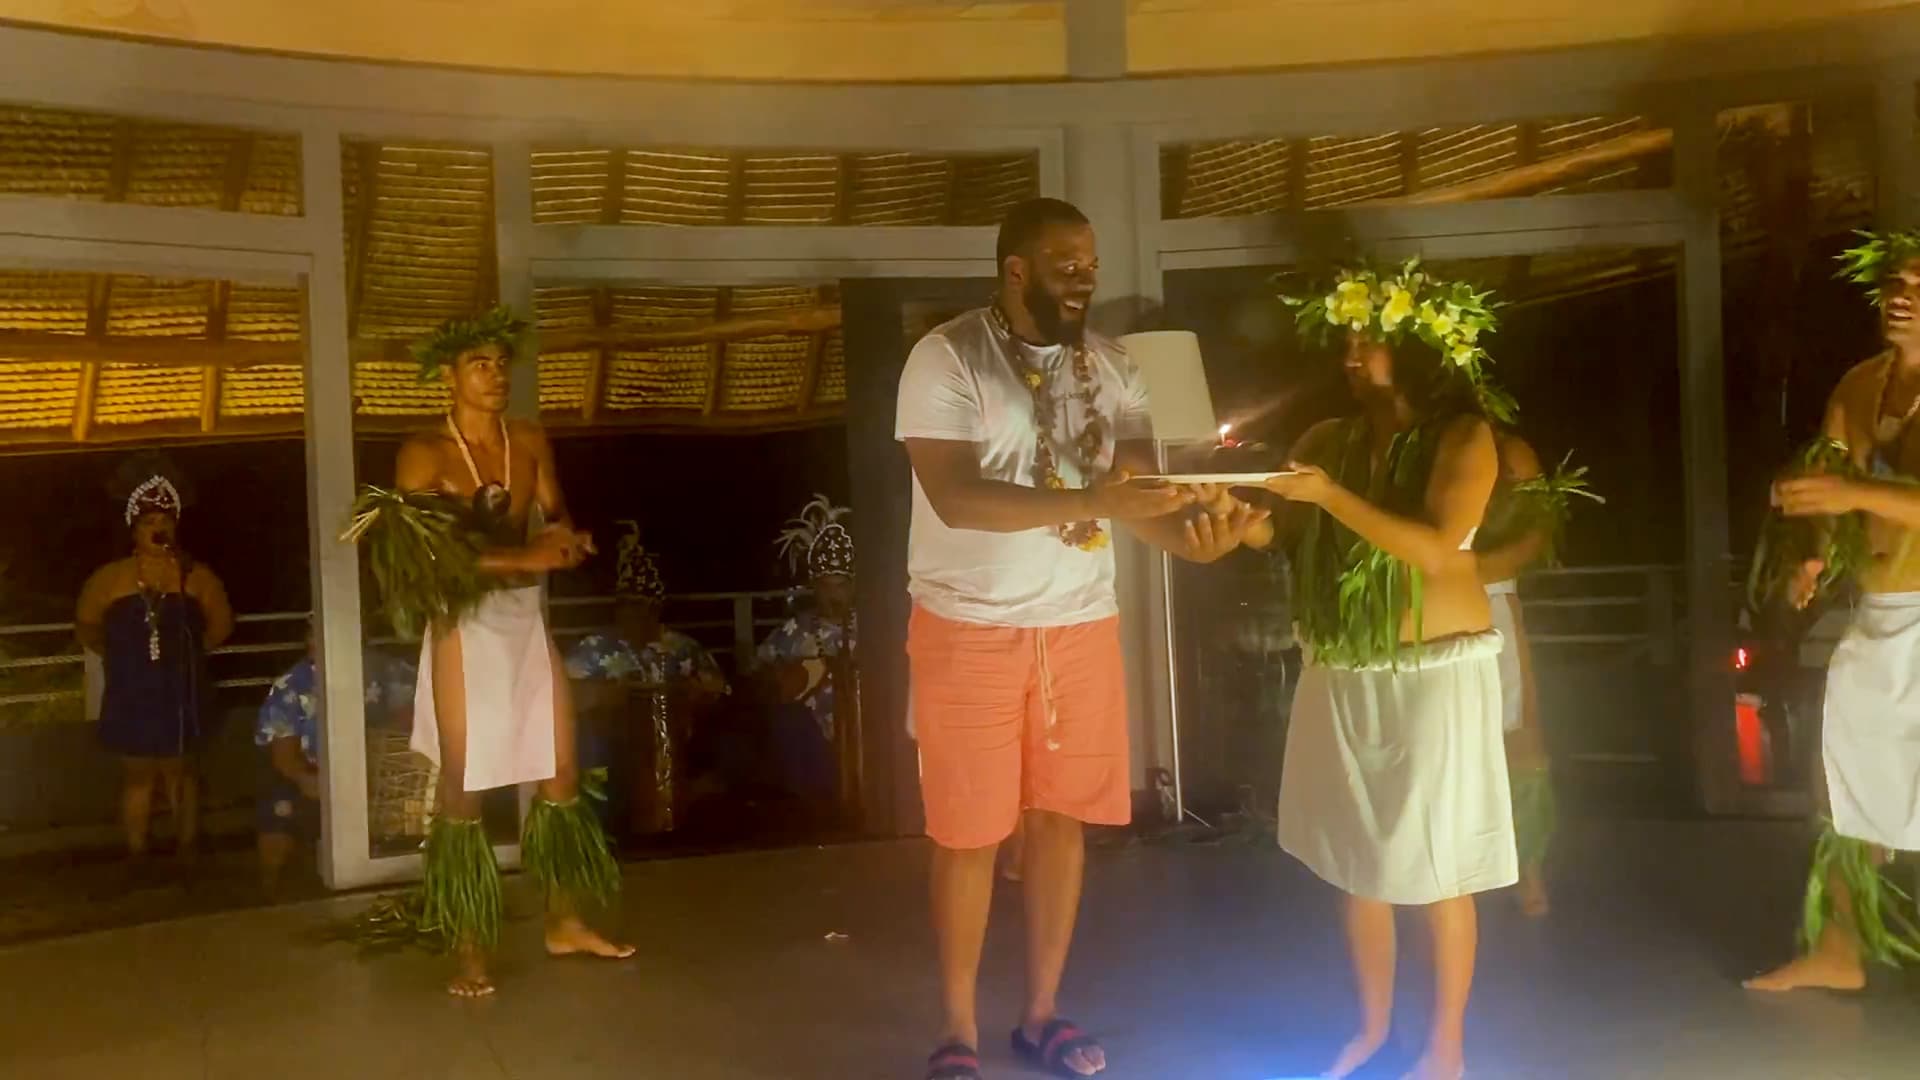 Alston surprises Gales for his birthday by having him brought on stage during the Polynesian celebration.